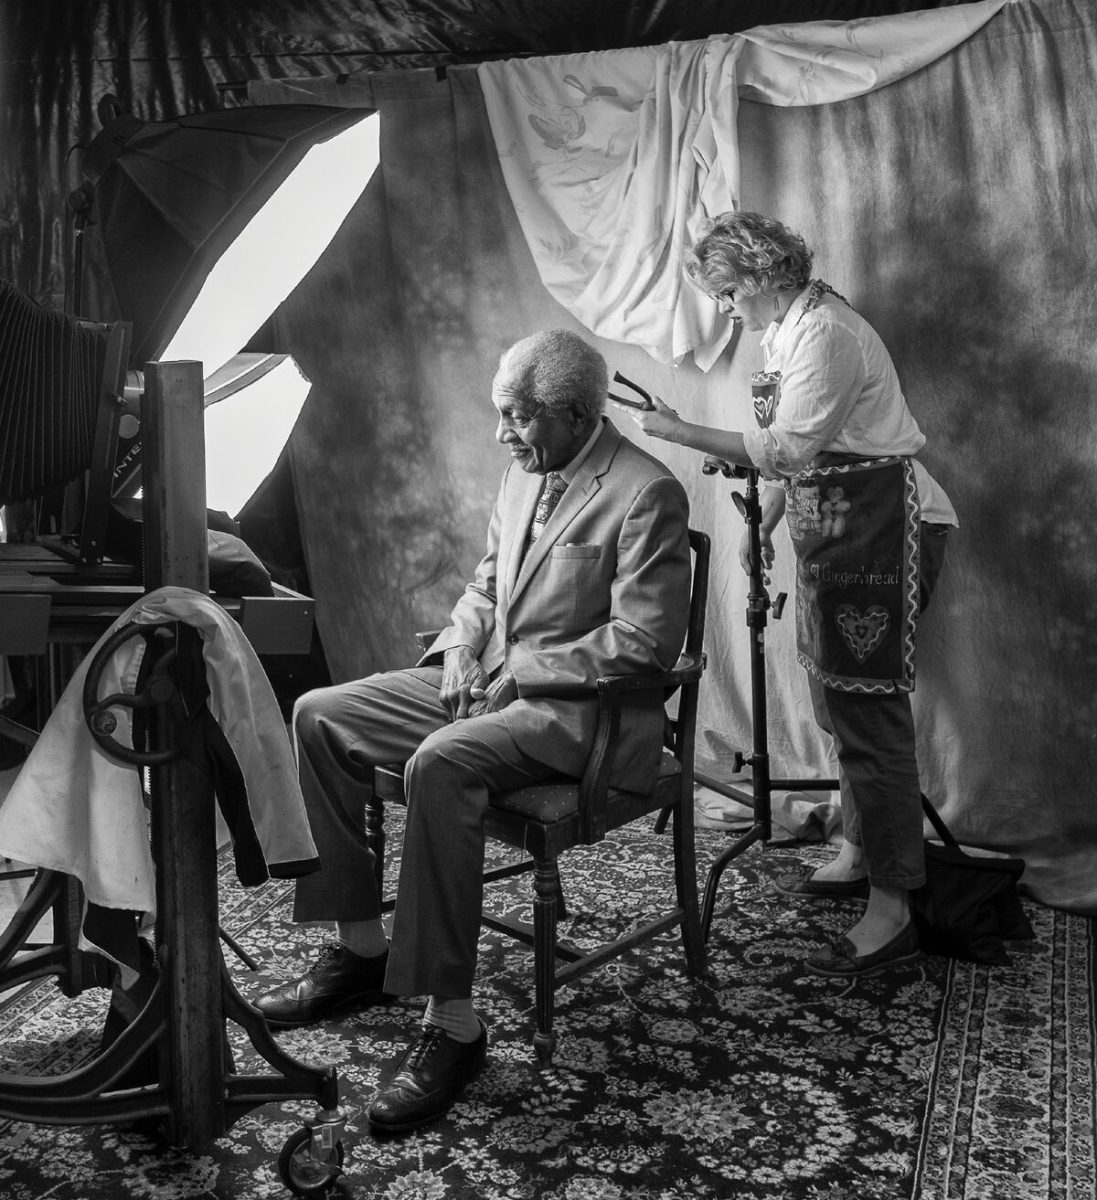 In a photo taken by her husband, who served as an assistant during the project, Professor Kathryn Mayo preps one of her subjects, F.D. Reese, before taking his photo as part of her sabbatical portrait project We Are Selma.